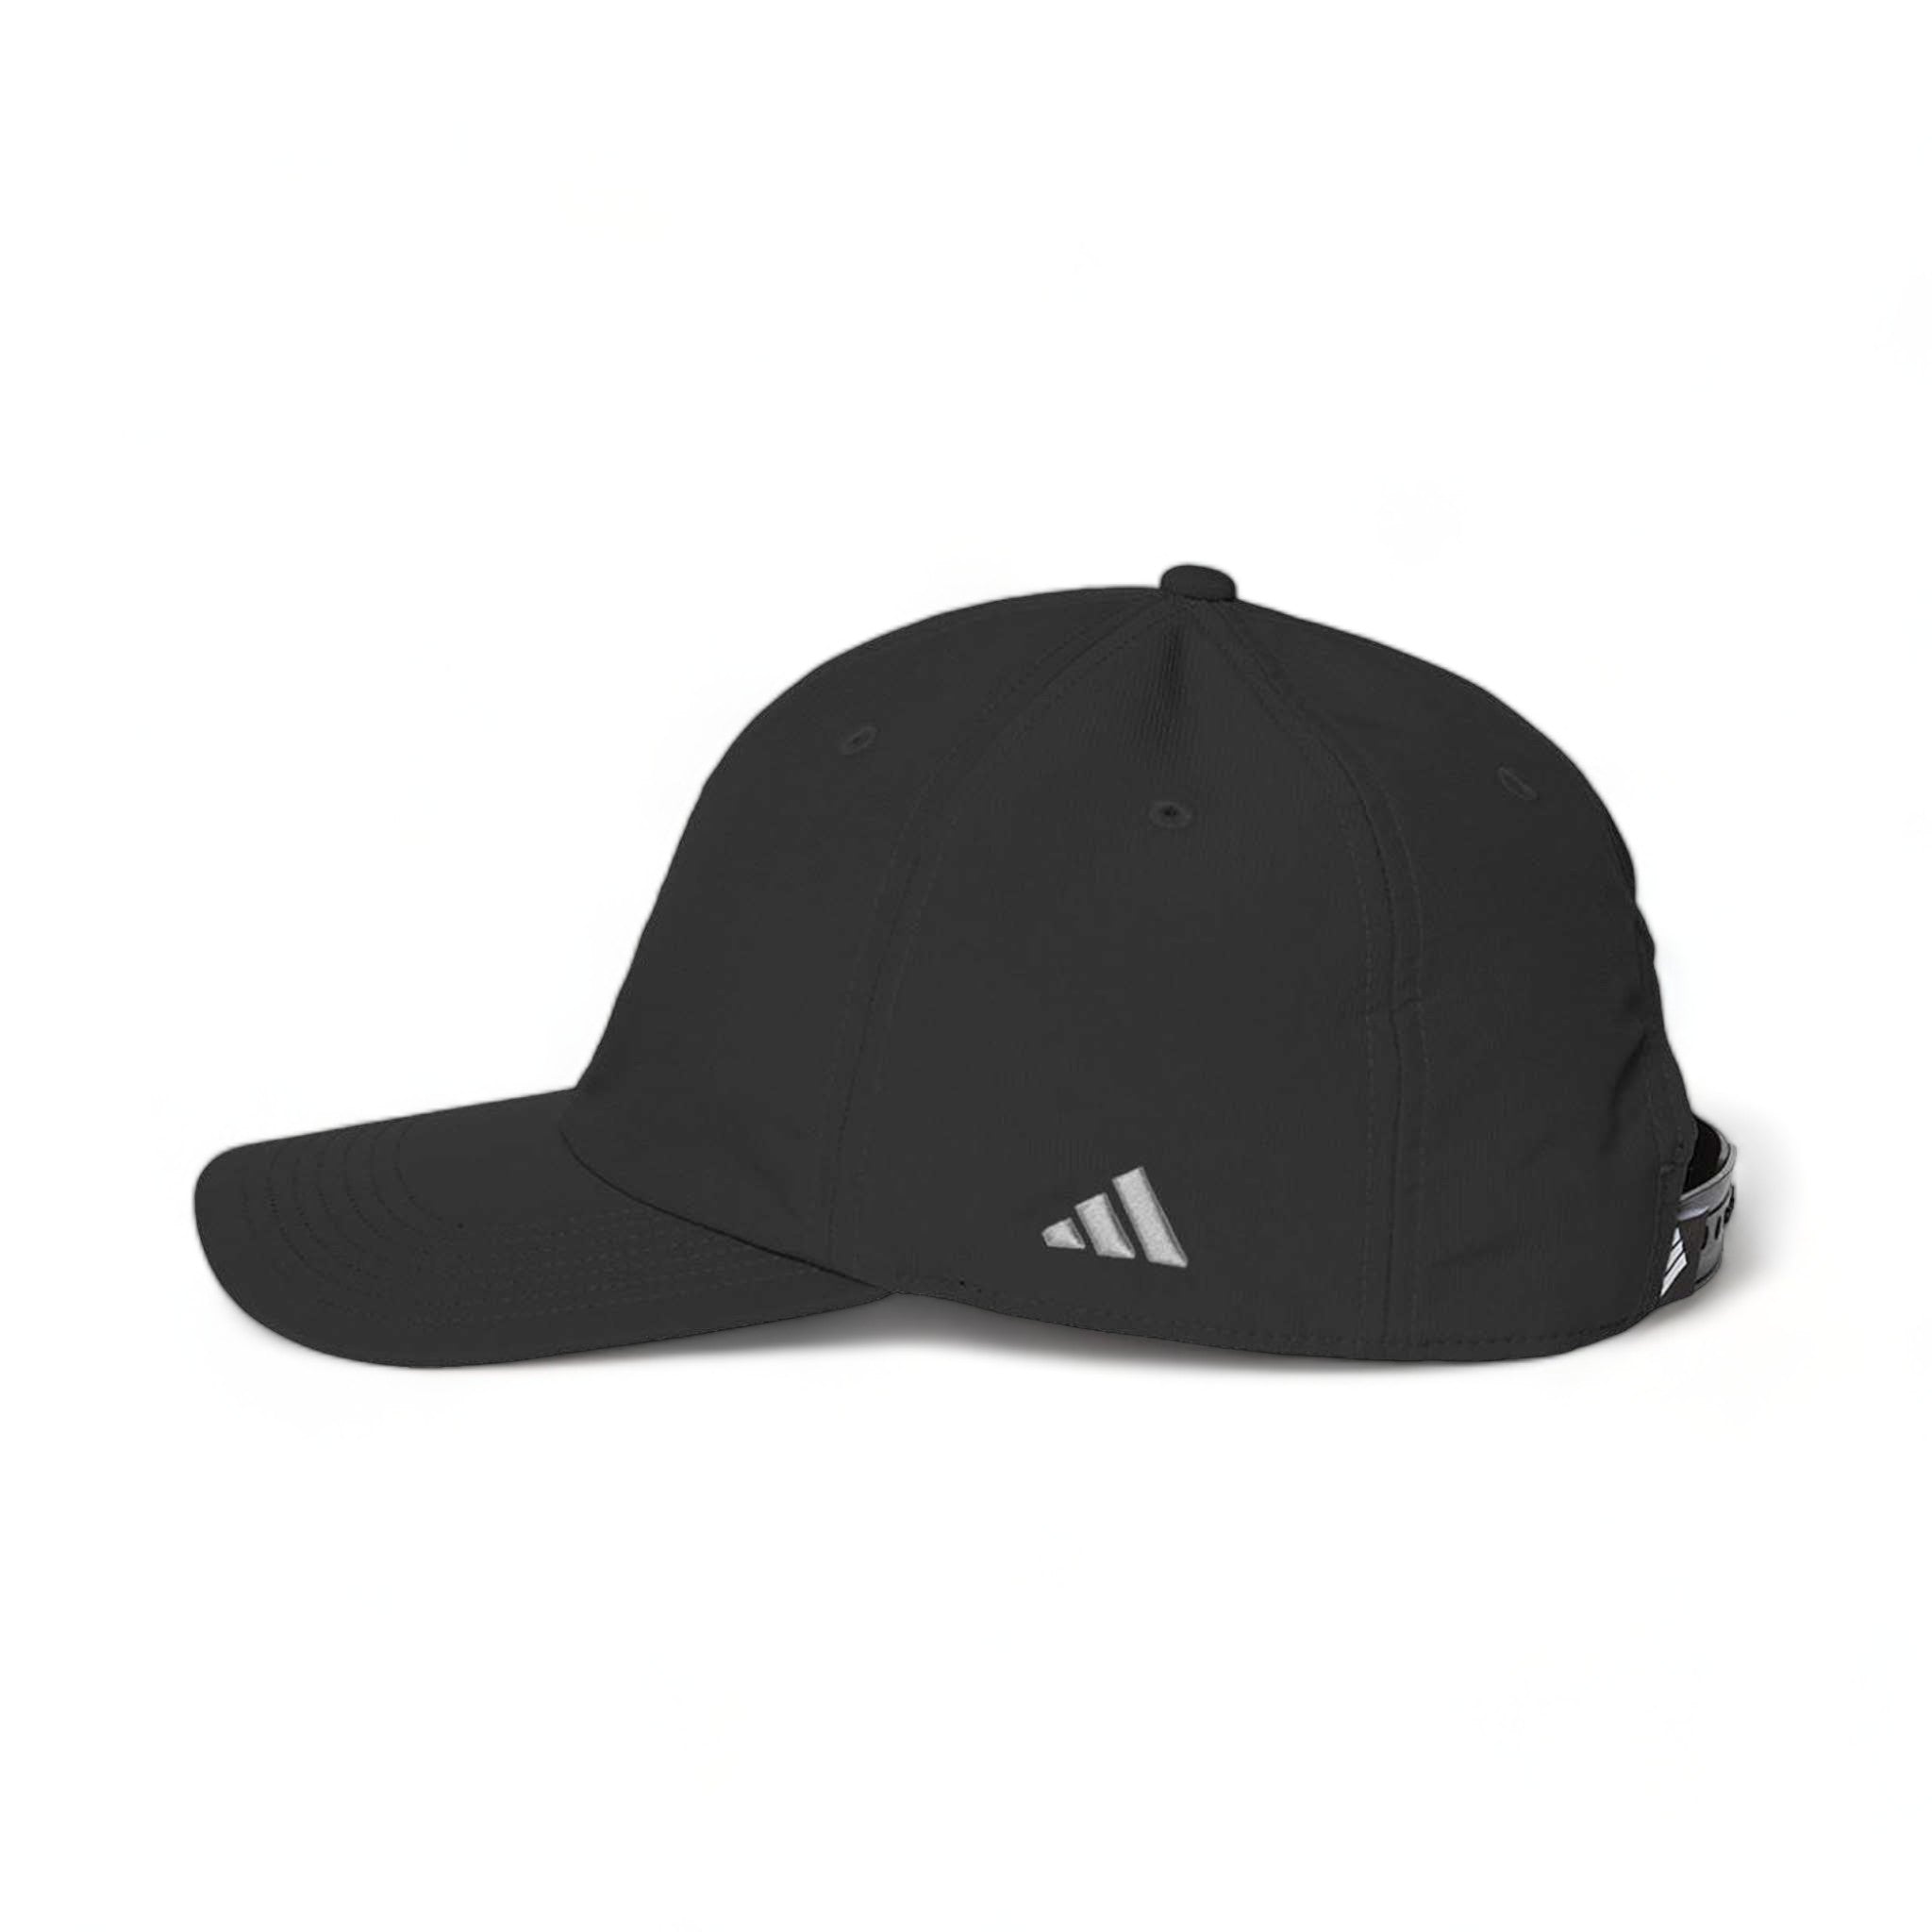 Side view of Adidas A605S custom hat in black